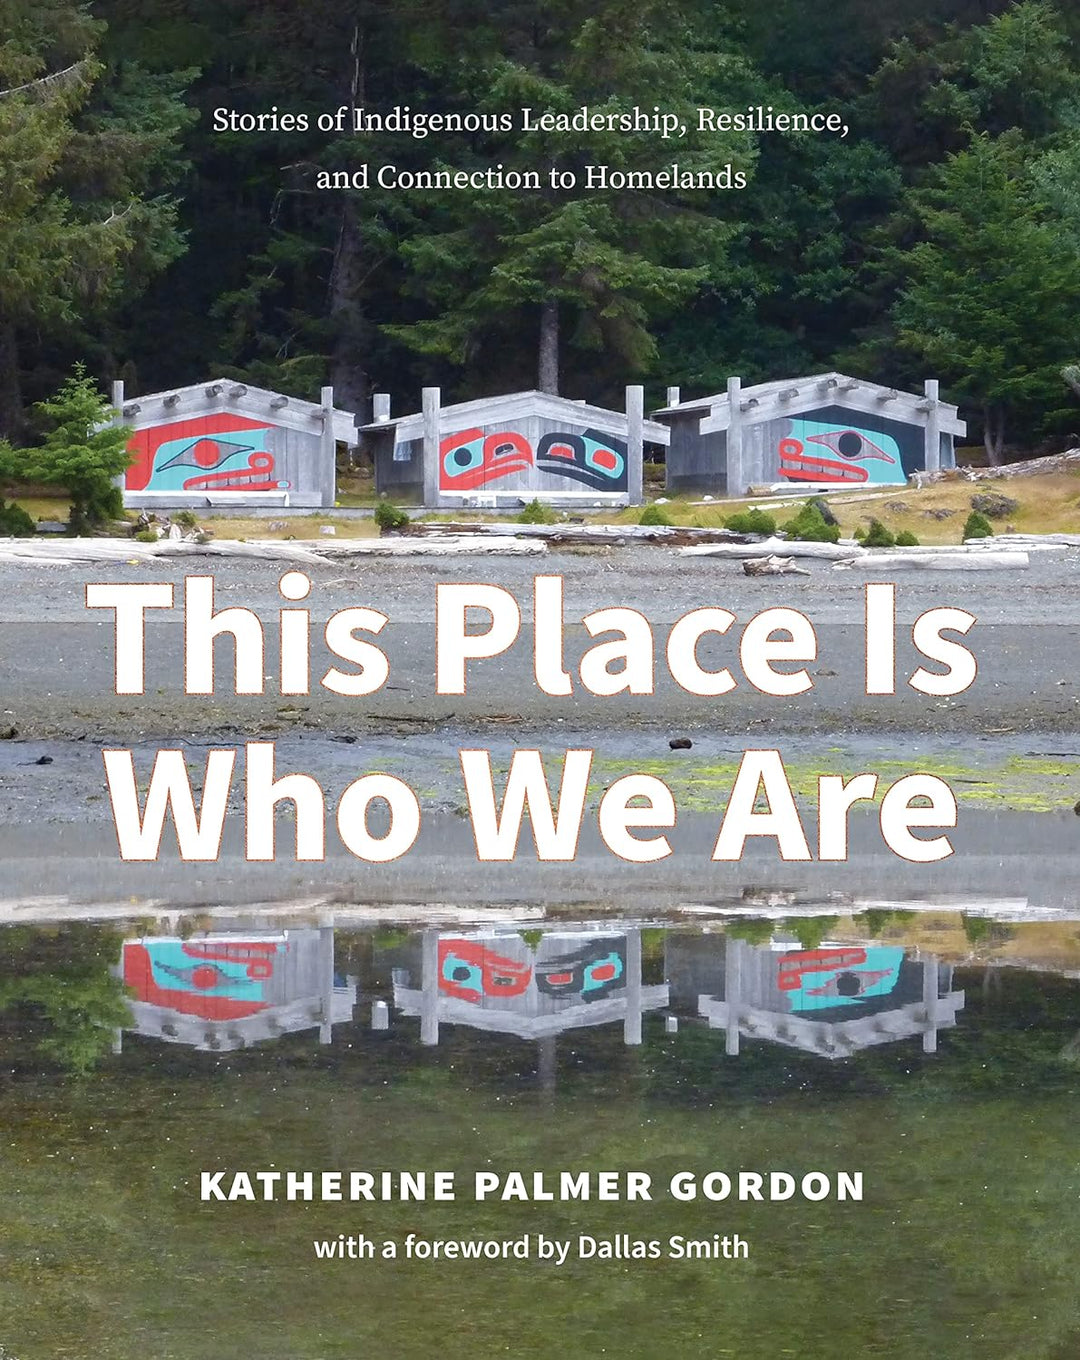 This Place Is Who We Are: Stories of Indigenous Leadership, Resilience, and Connection to Homelands by Katherine Palmer Gordon